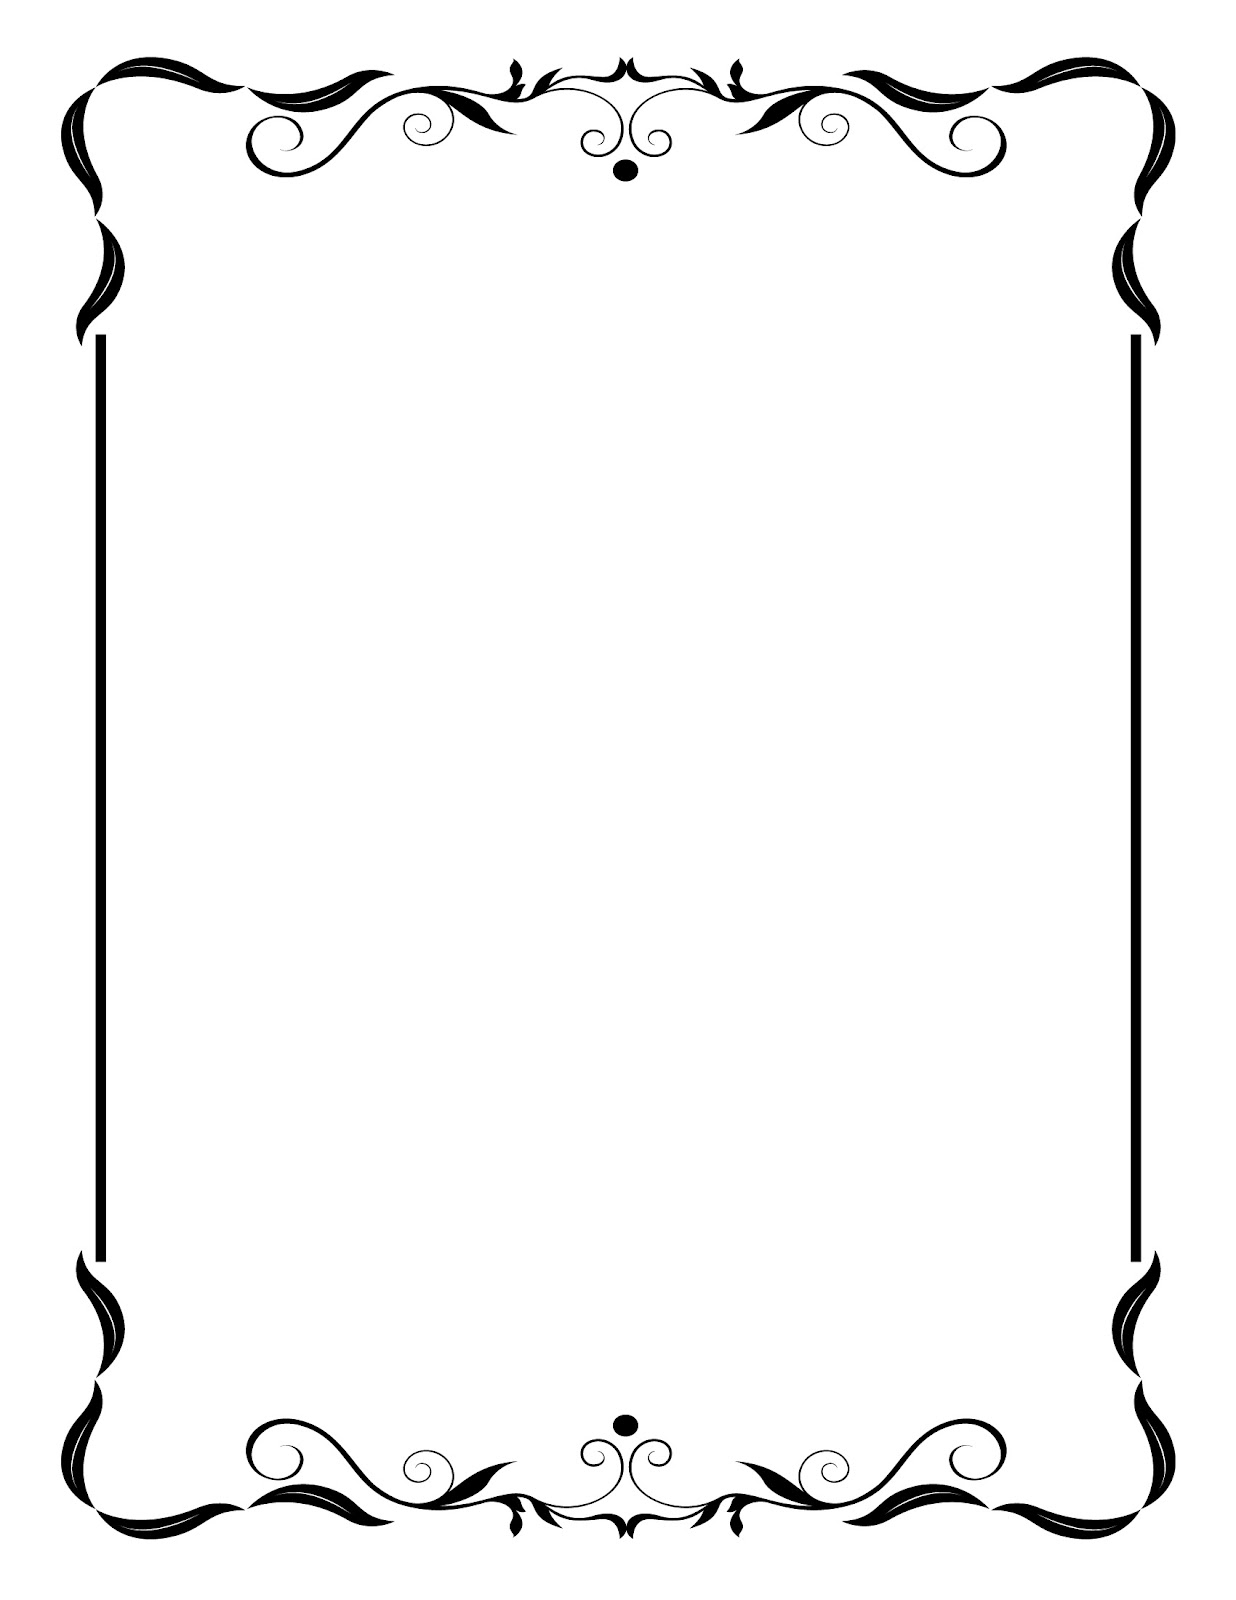 Free Borders Wedding Images Free Download Clipart